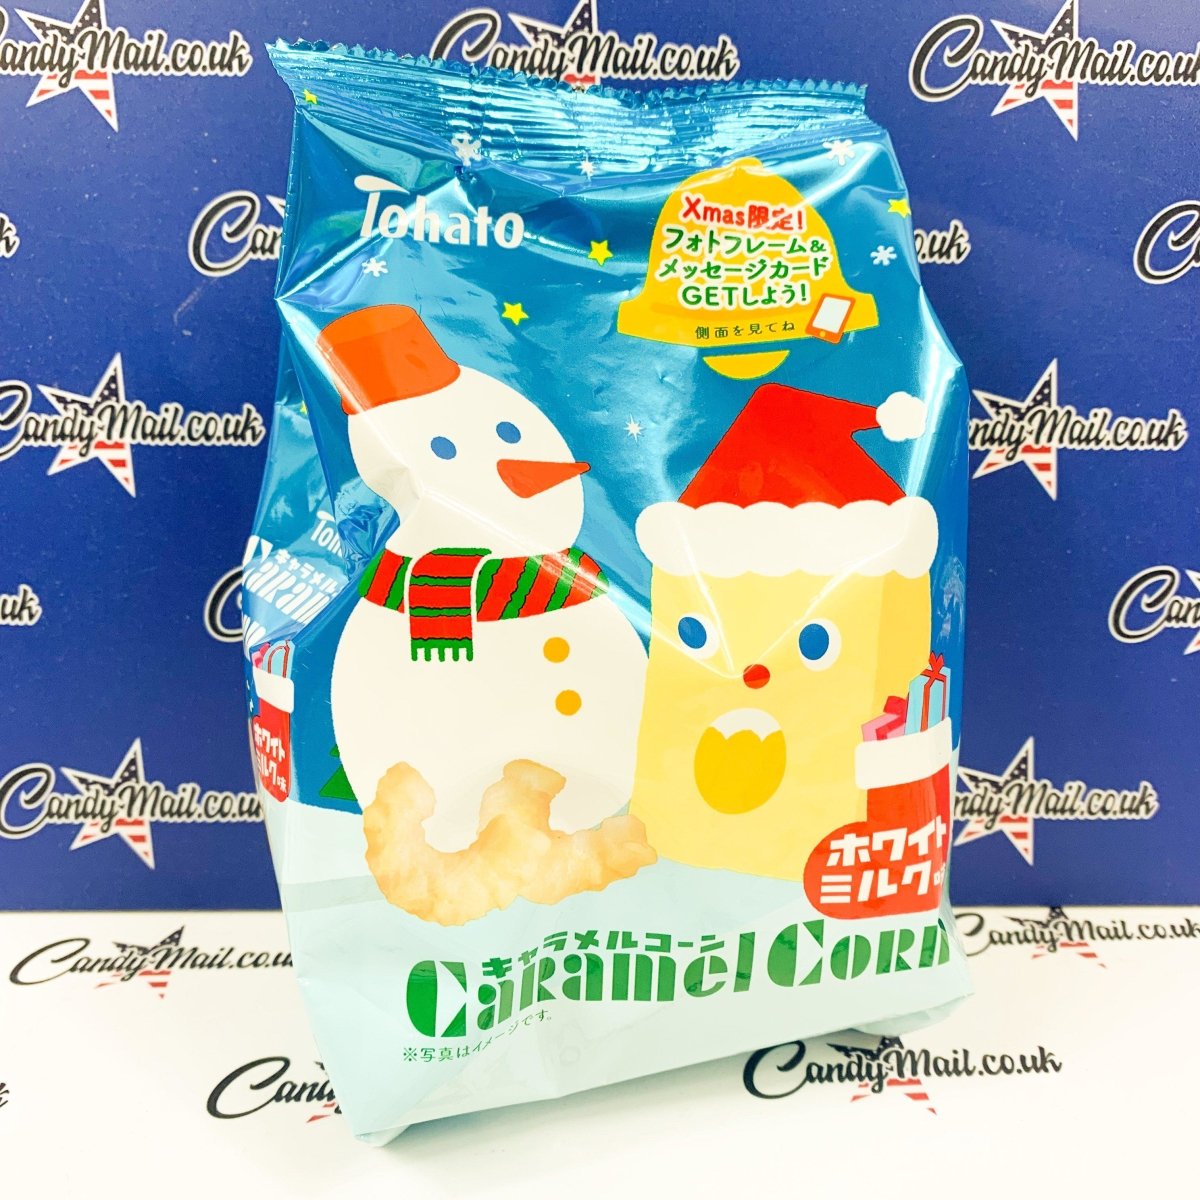 Tohato Caramel Corn Christmas Pack 77g - Candy Mail UK